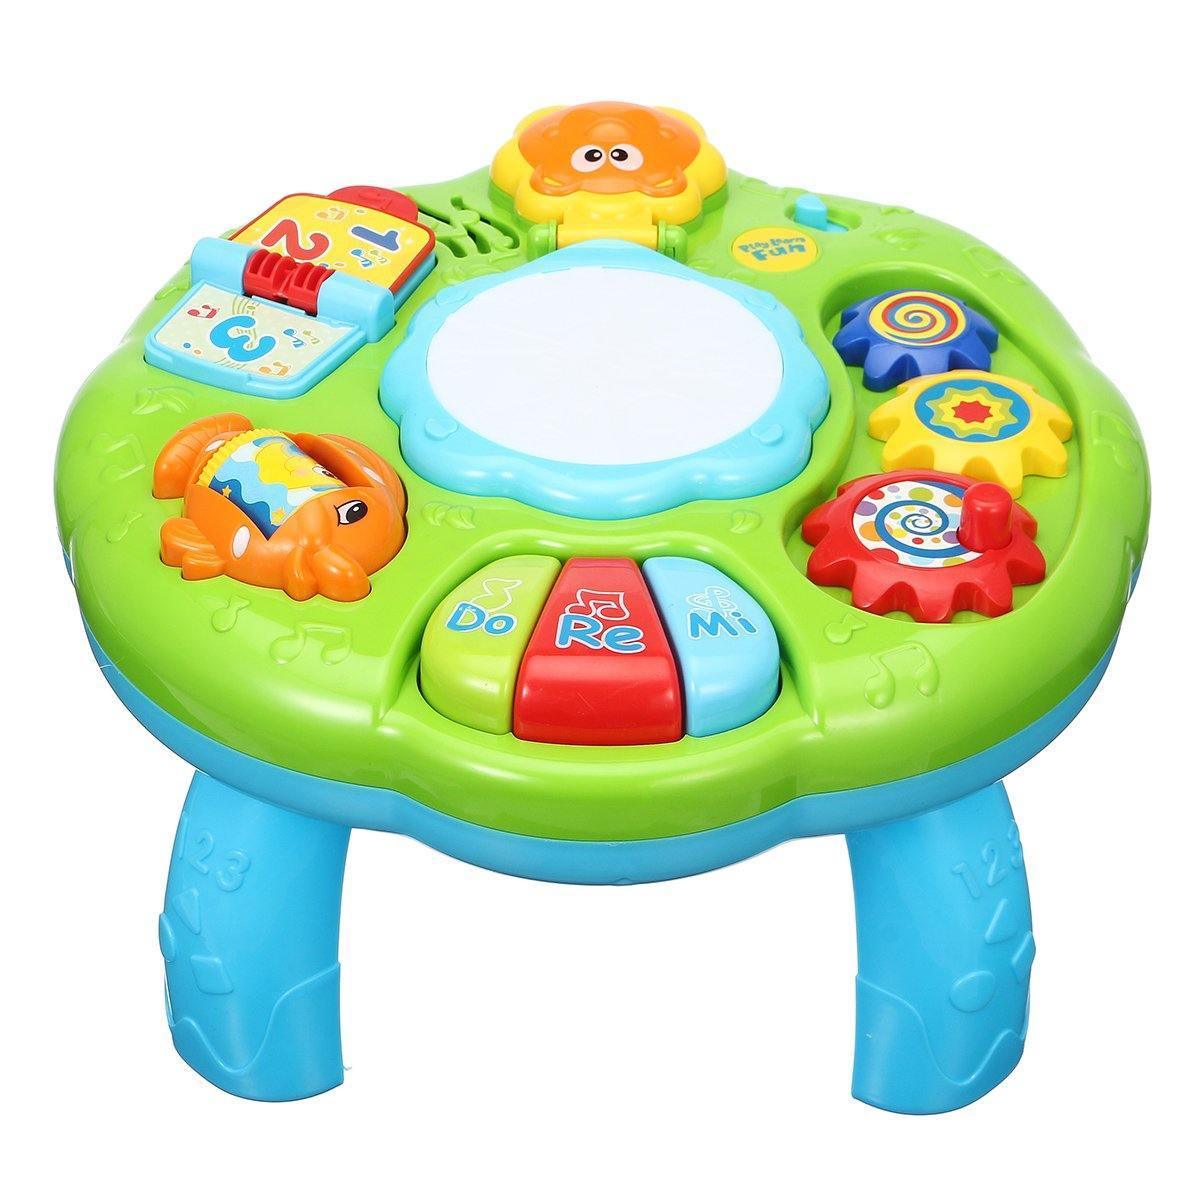 ezy2find Baby Activity Learning Table Game Playing Toys Green Educational Piano Pat Drum Musical Baby Activity Learning Table Game Playing Toys